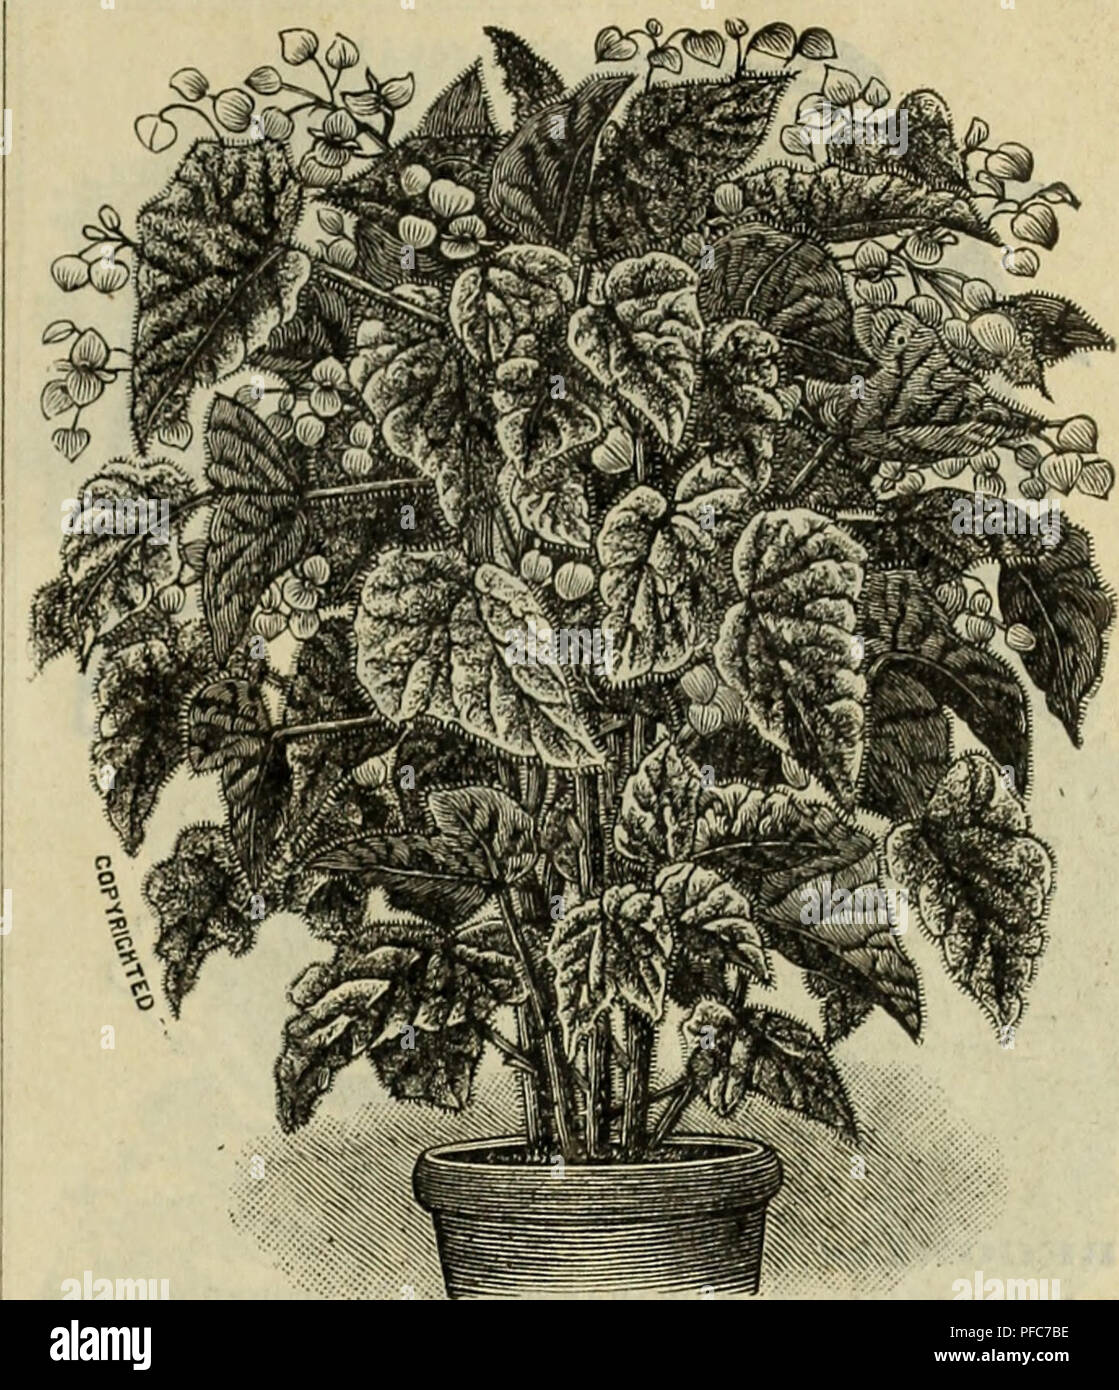 . Descriptive catalogue : trees plants seeds.. Trees Catalogs; Flowers Catalogs; Vegetables Seeds Catalogs; Commercial catalogs Texas Fort Worth; Trees; Flowers; Vegetables; Commercial catalogs. BEGONIA YKKNON.. BliGONIA METALLICA. President Caruot. A remarkably strong-grow- ing variety, of stiff, upright habit; foliage very large, flowers beautiful coral red, in large, penednt panicles similar to Rubras, but very much larger. 25 cts. Wettsteinii. (New.) This fine Begonia is in the direct line of Rubra, so well and favorably known. The leaf is ornamental, being peculiarly indented, and a lovel Stock Photo